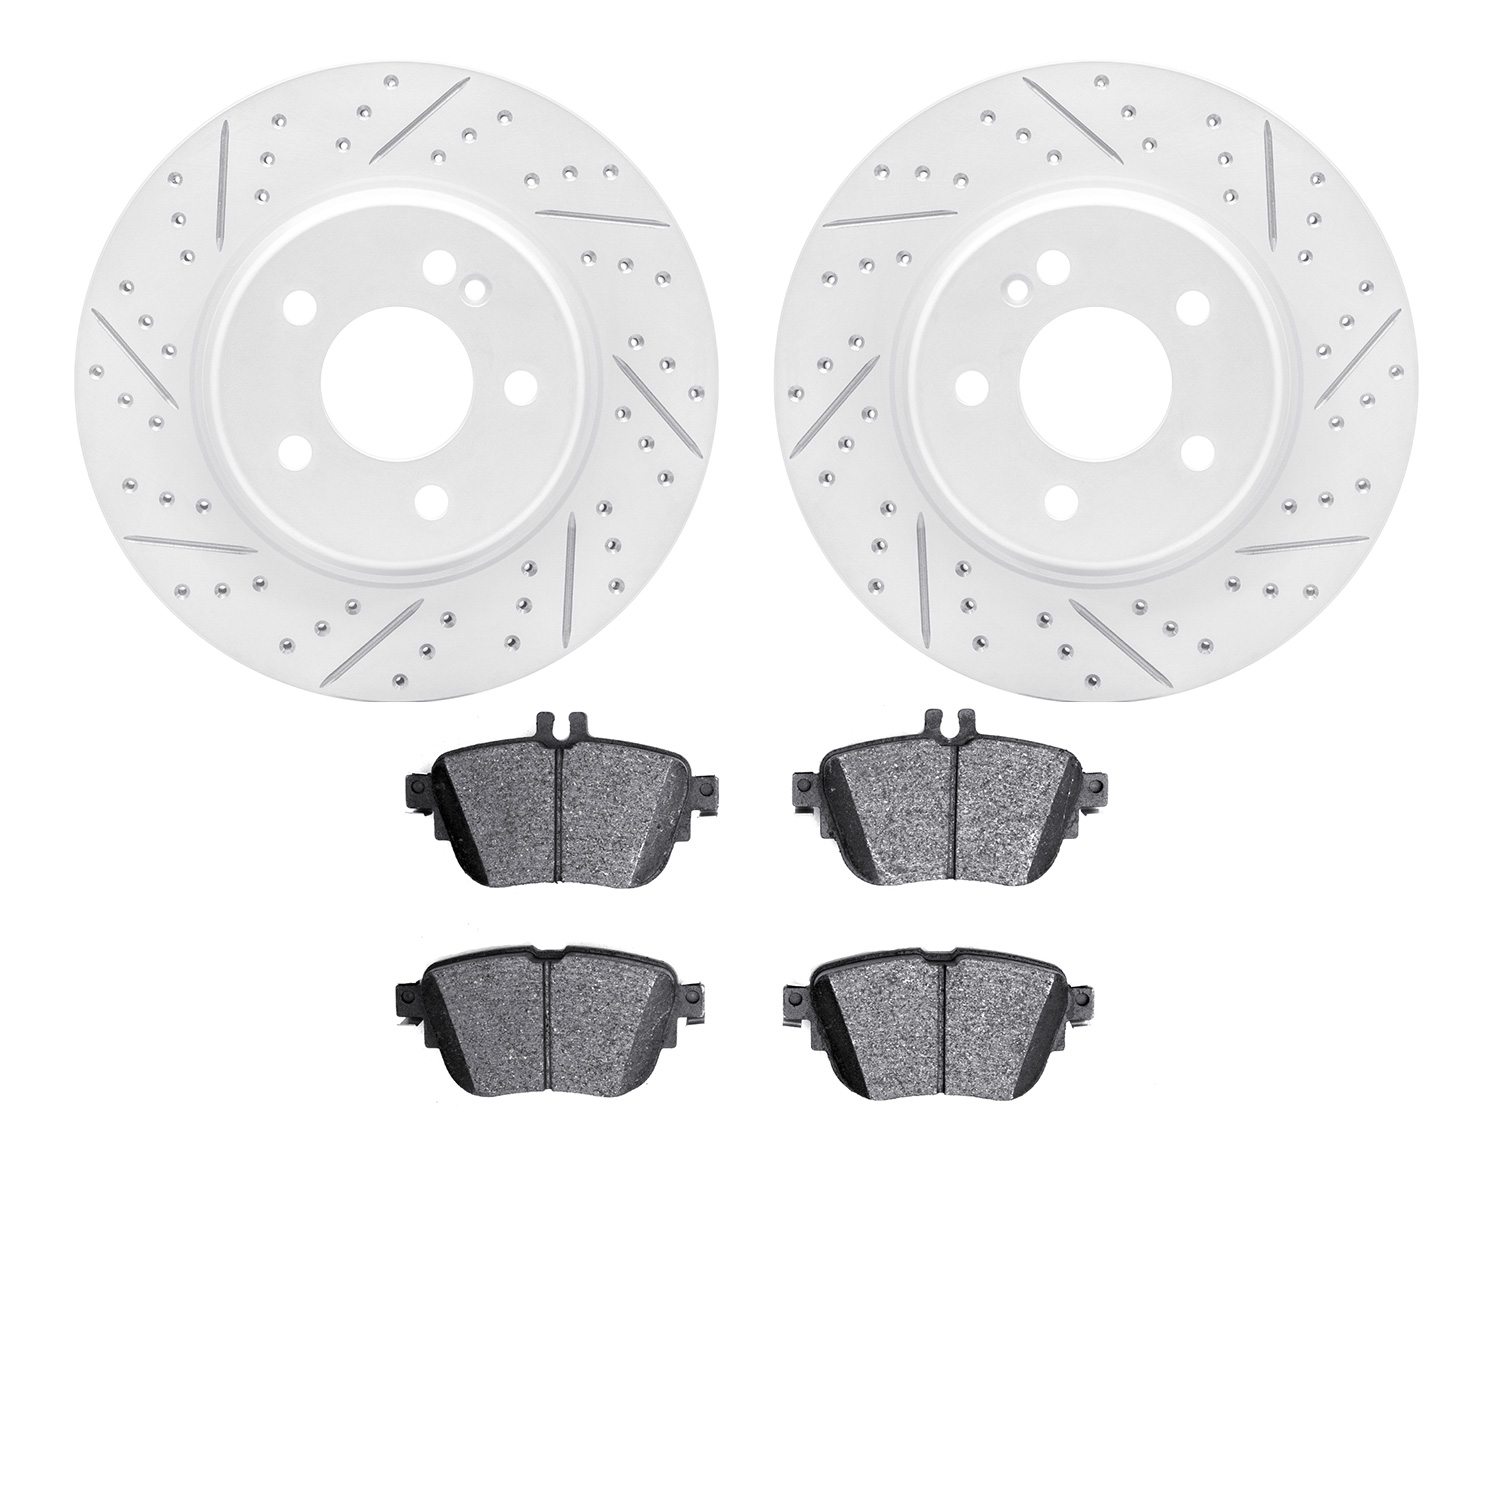 2502-63048 Geoperformance Drilled/Slotted Rotors w/5000 Advanced Brake Pads Kit, 2017-2019 Mercedes-Benz, Position: Rear